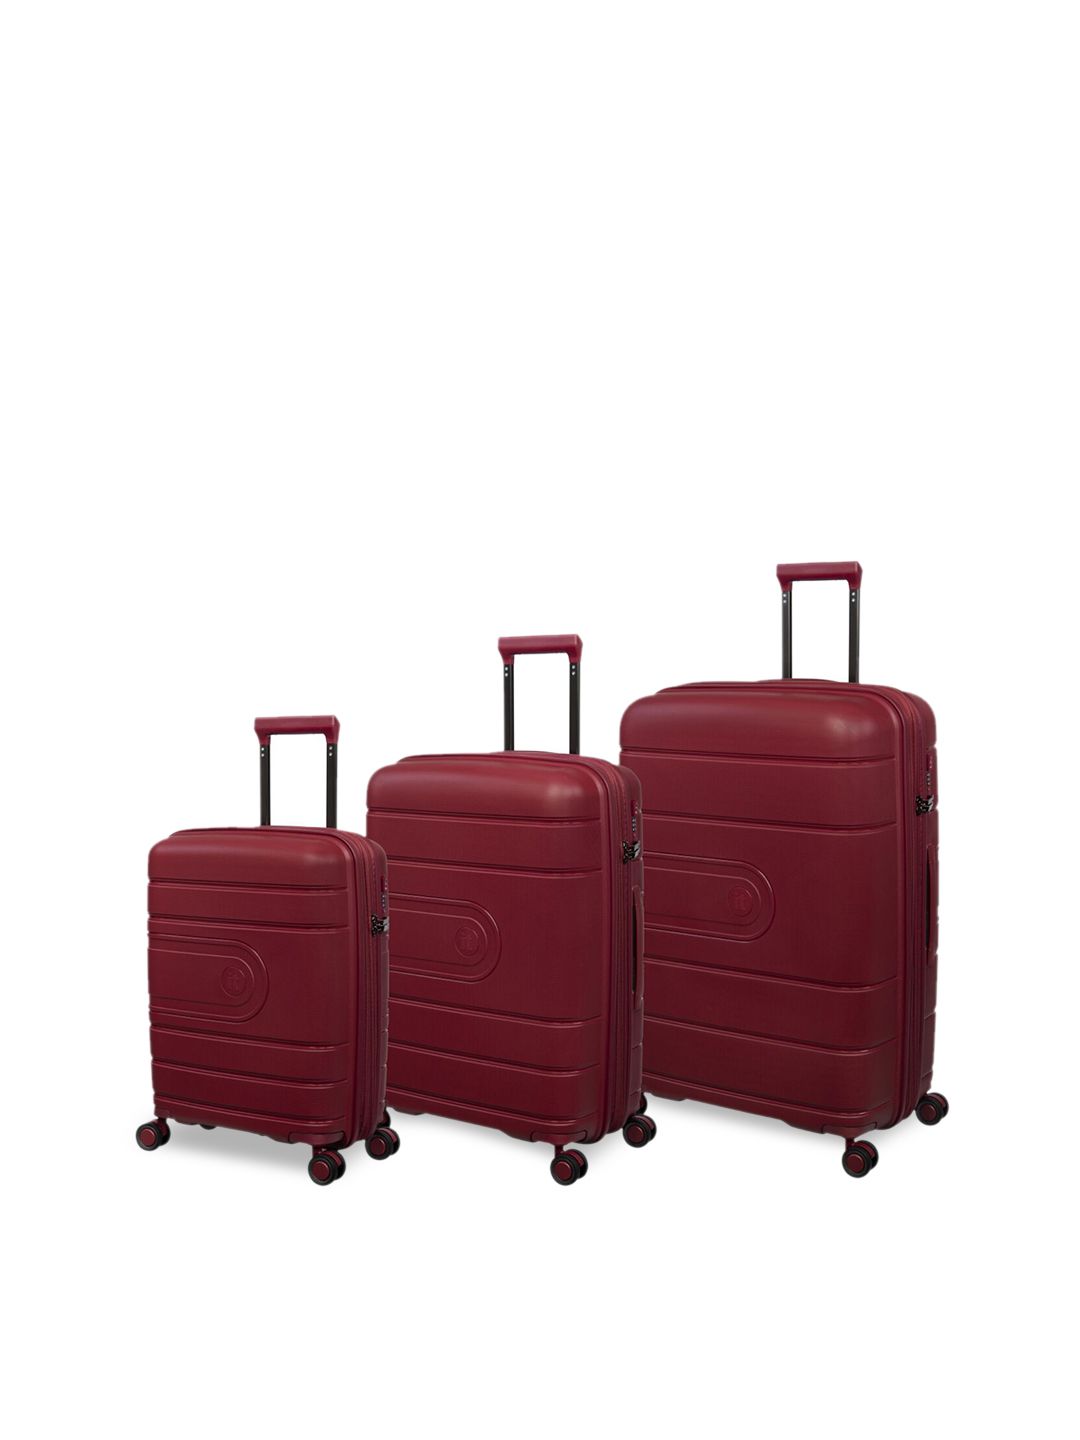 IT luggage Set of 3 Red Trolley Bags Price in India